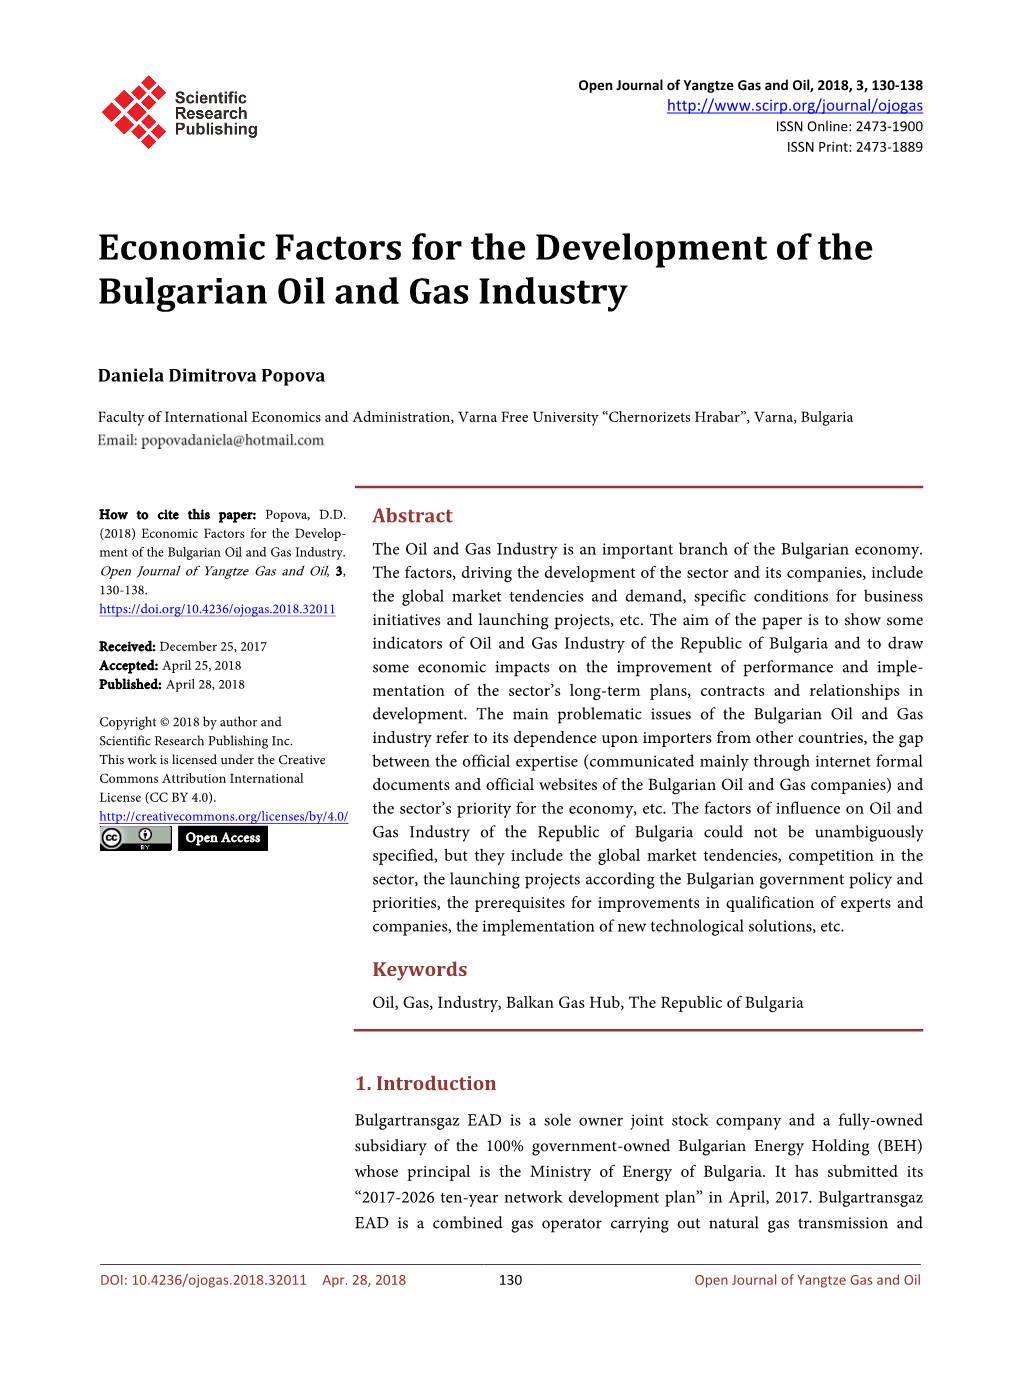 Economic Factors for the Development of the Bulgarian Oil and Gas Industry